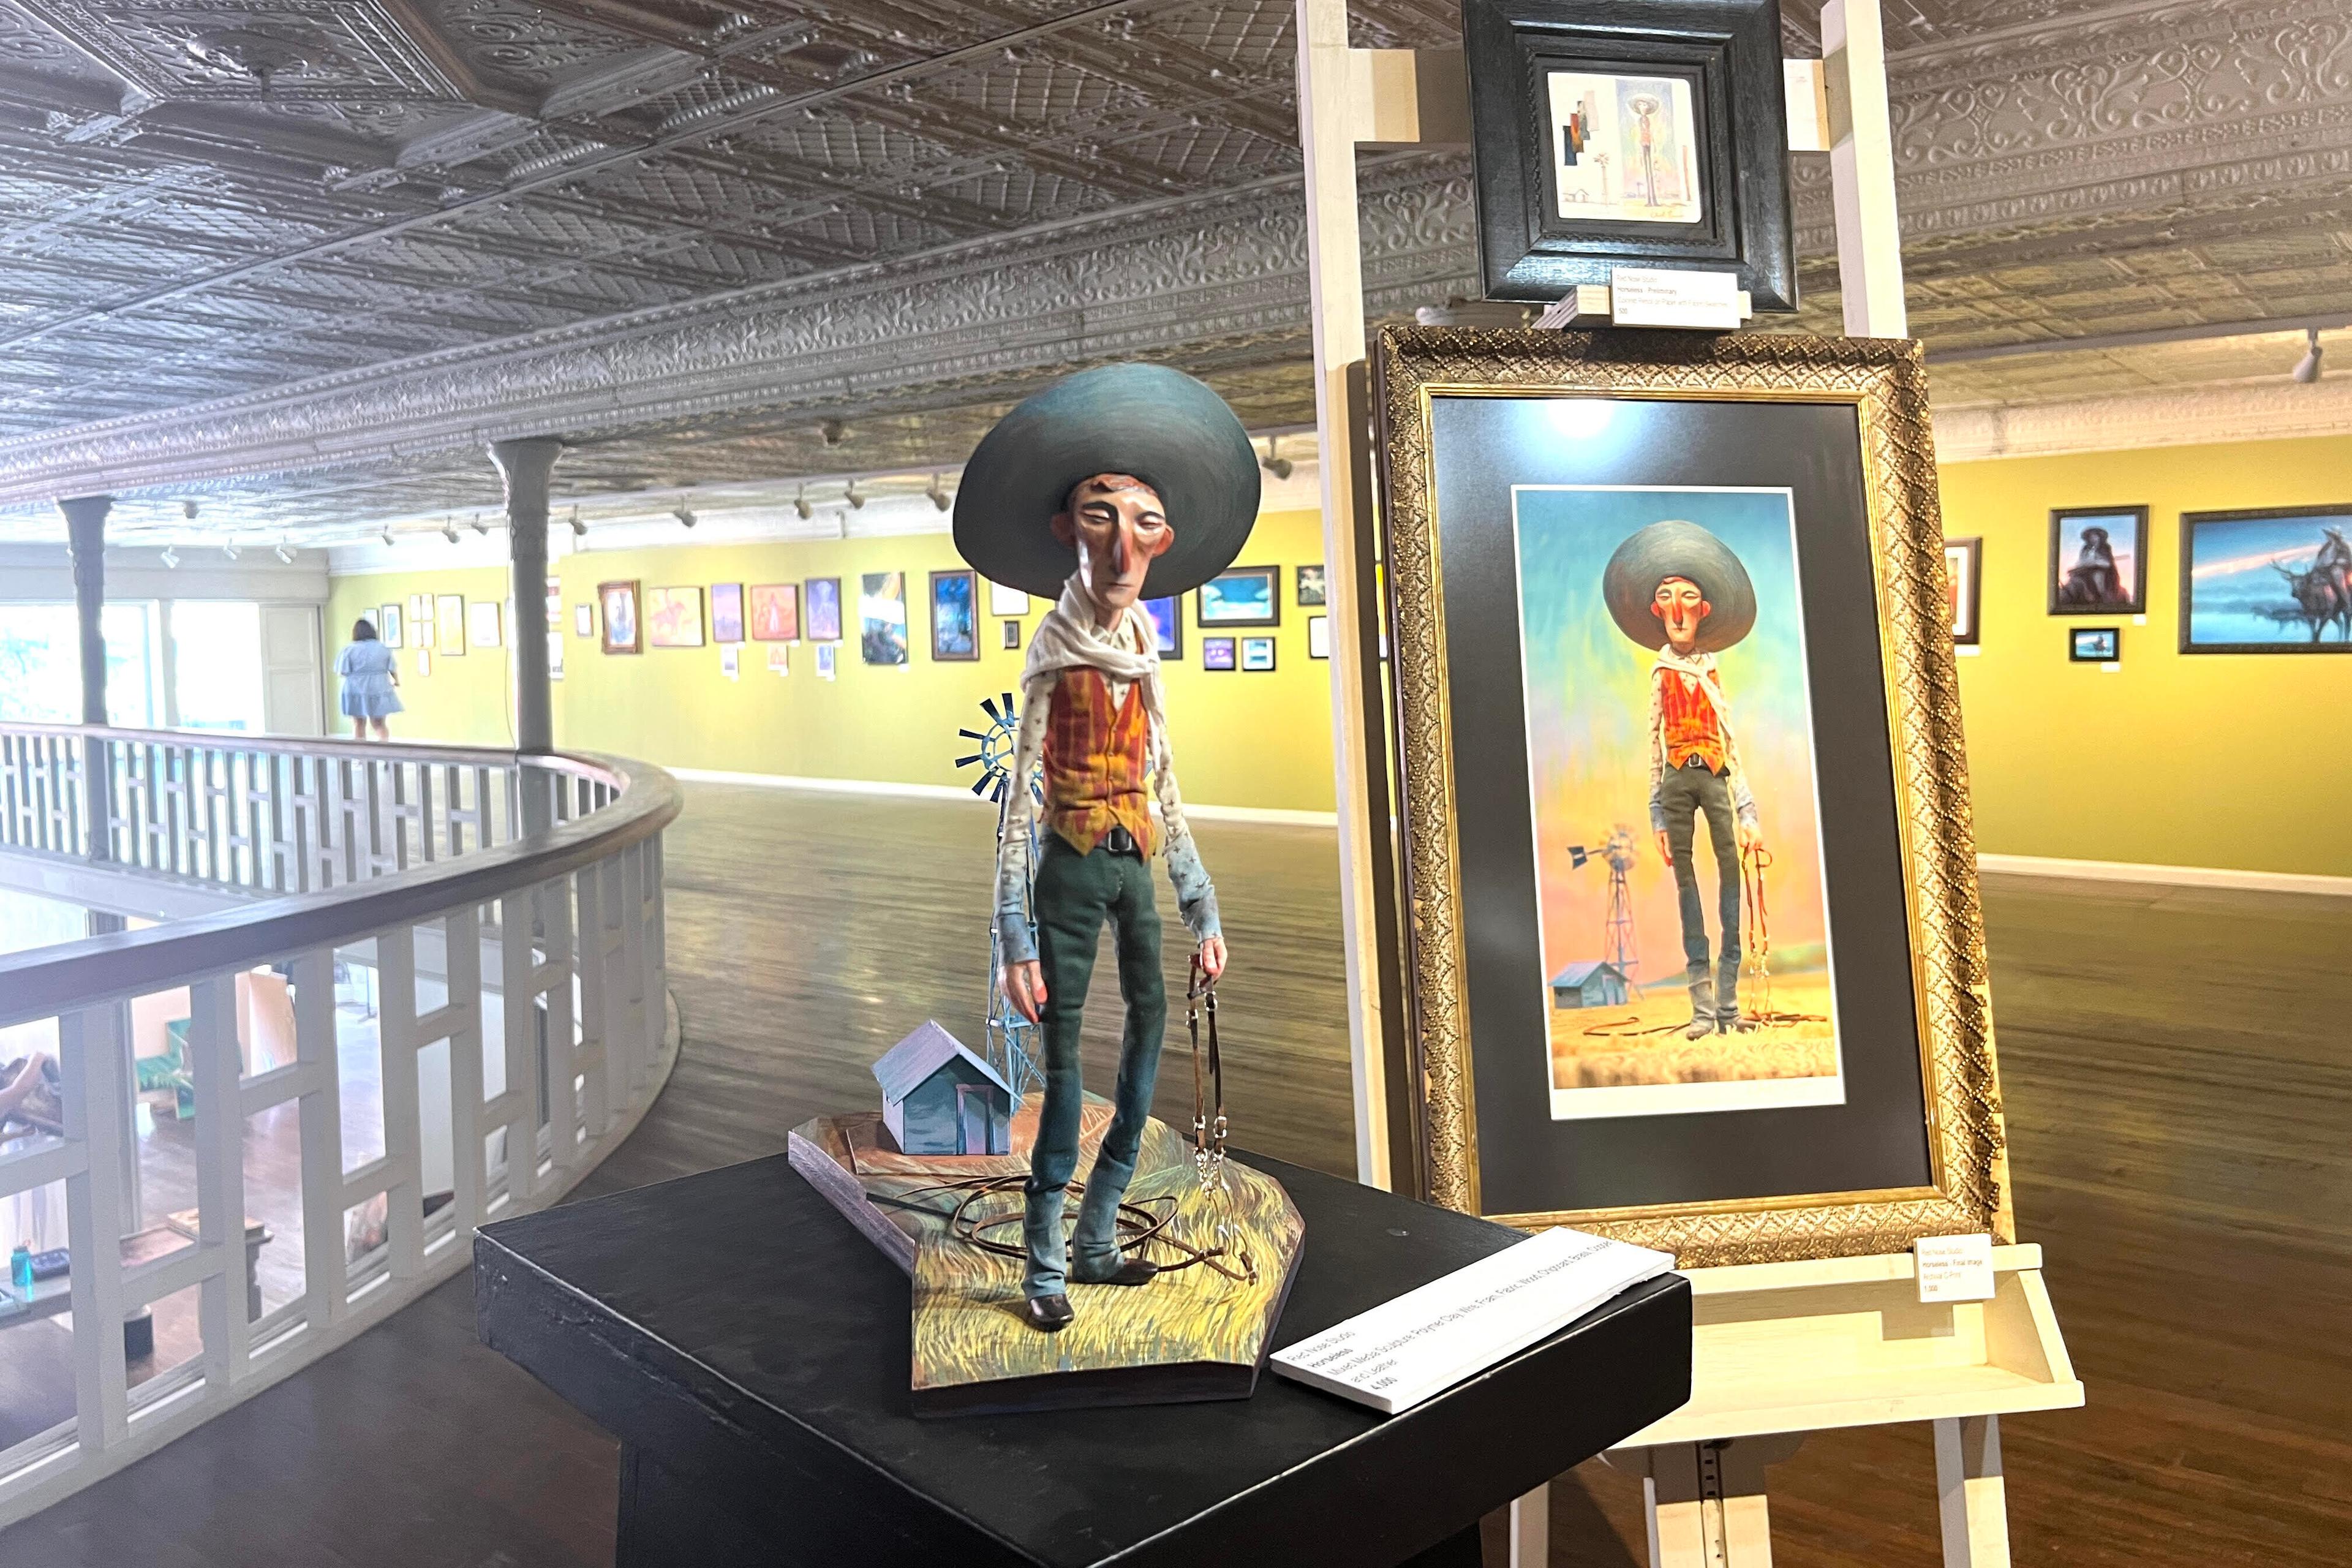 Three renderings of the same cowboy: one sculpture, one preliminary work, and one final image.